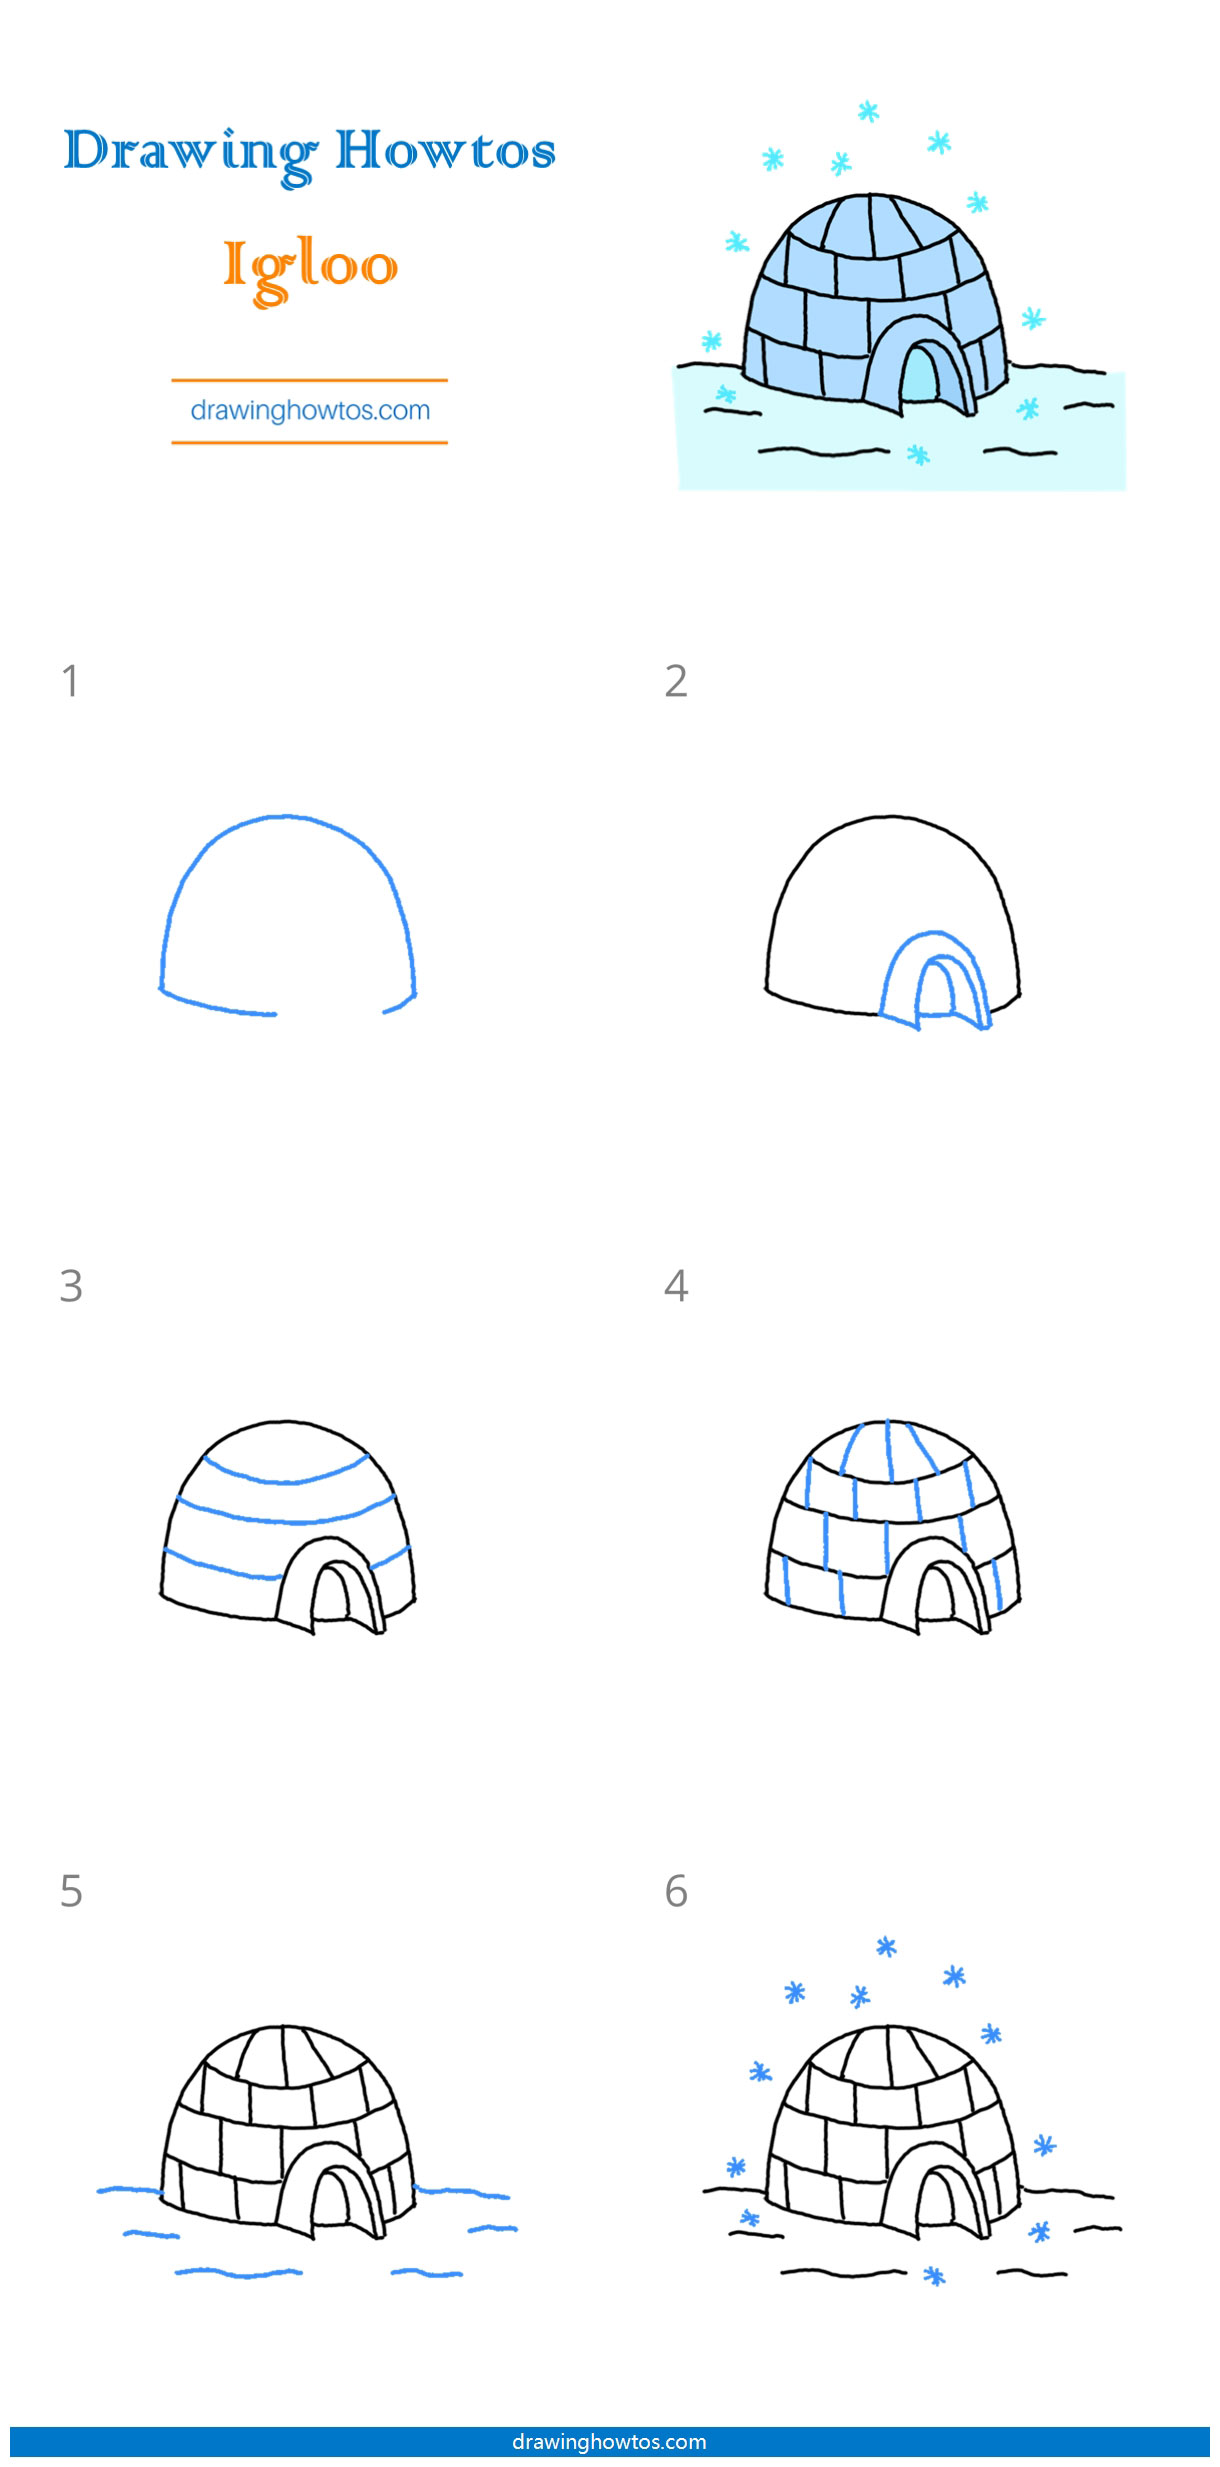 How to Draw an Igloo Step by Step Easy Drawing Guides Drawing Howtos